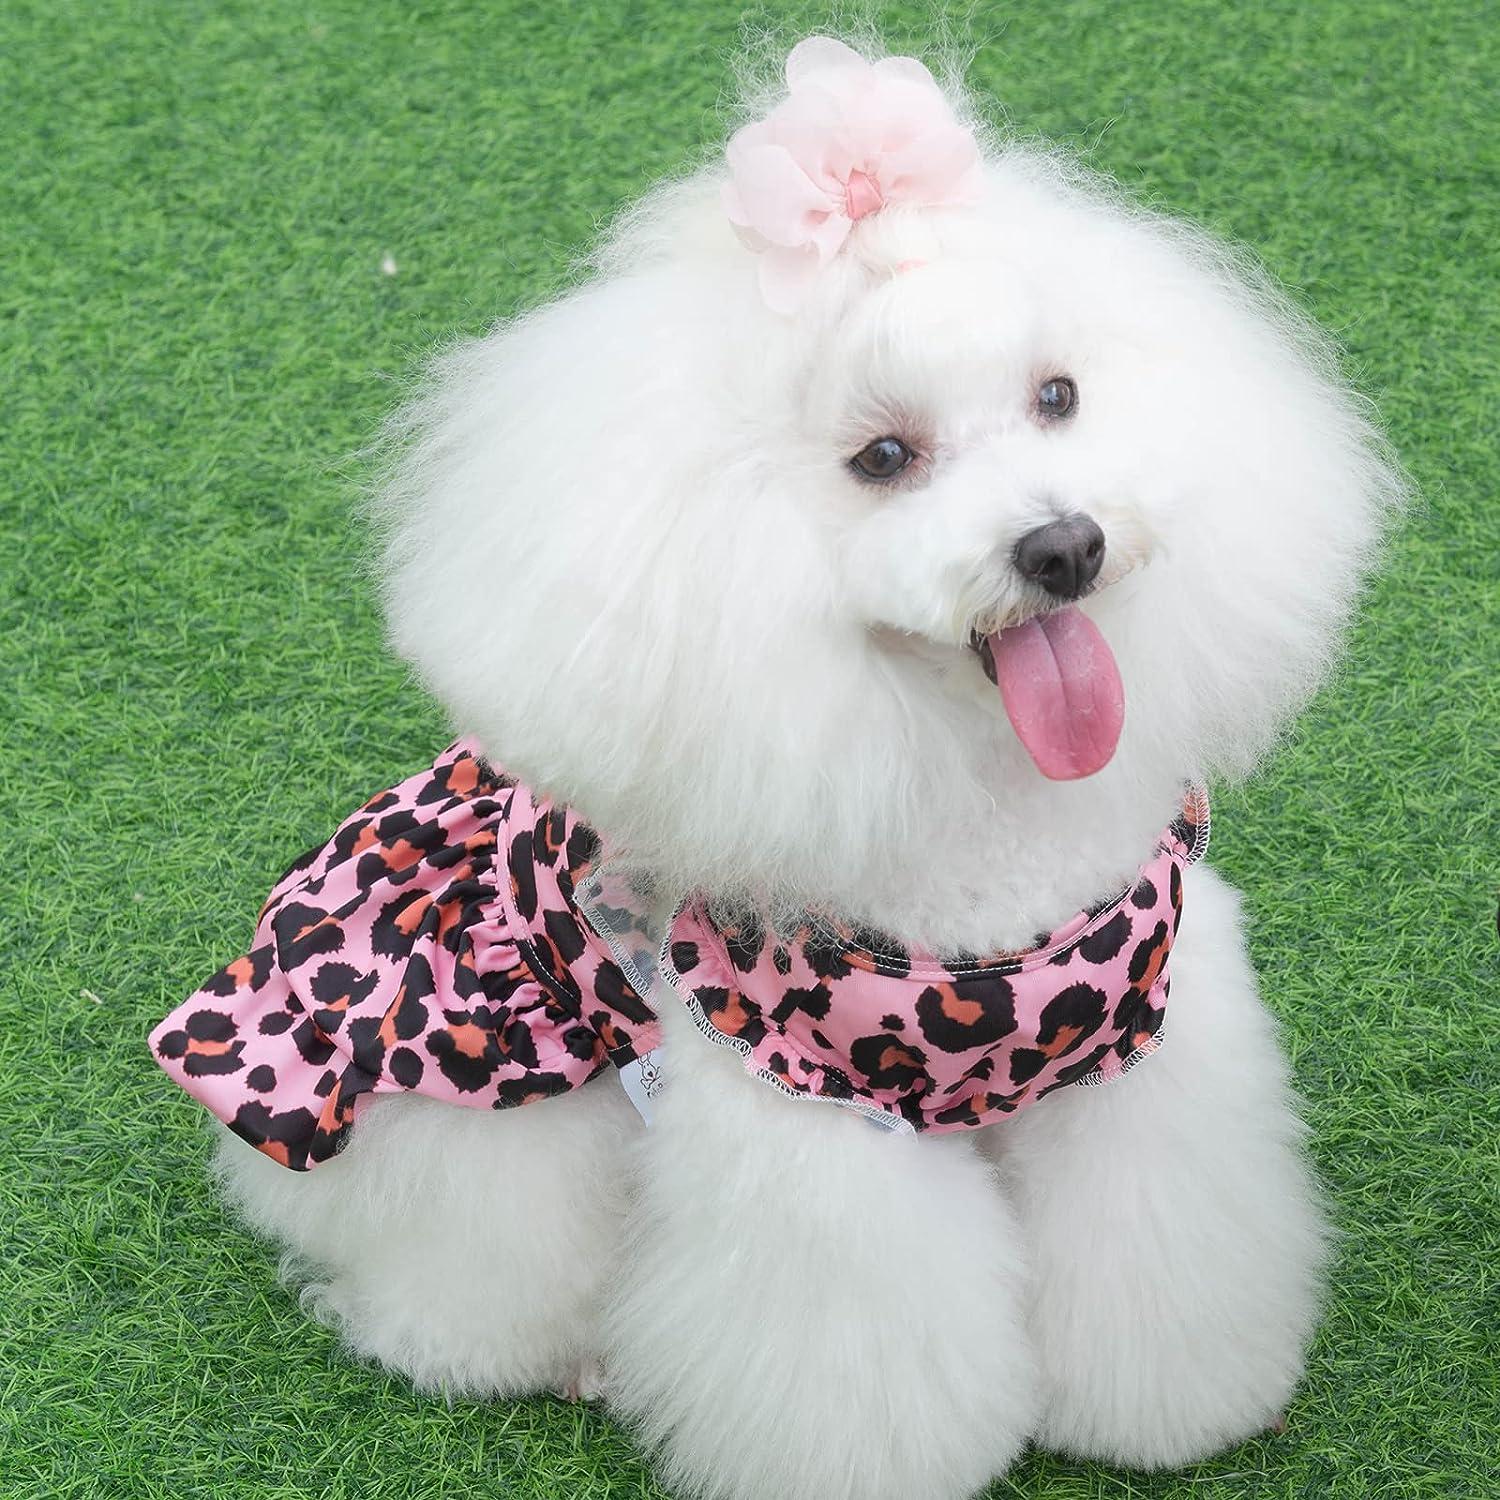 Valentine's Day Gift for Dogs, Pink Dog Bow